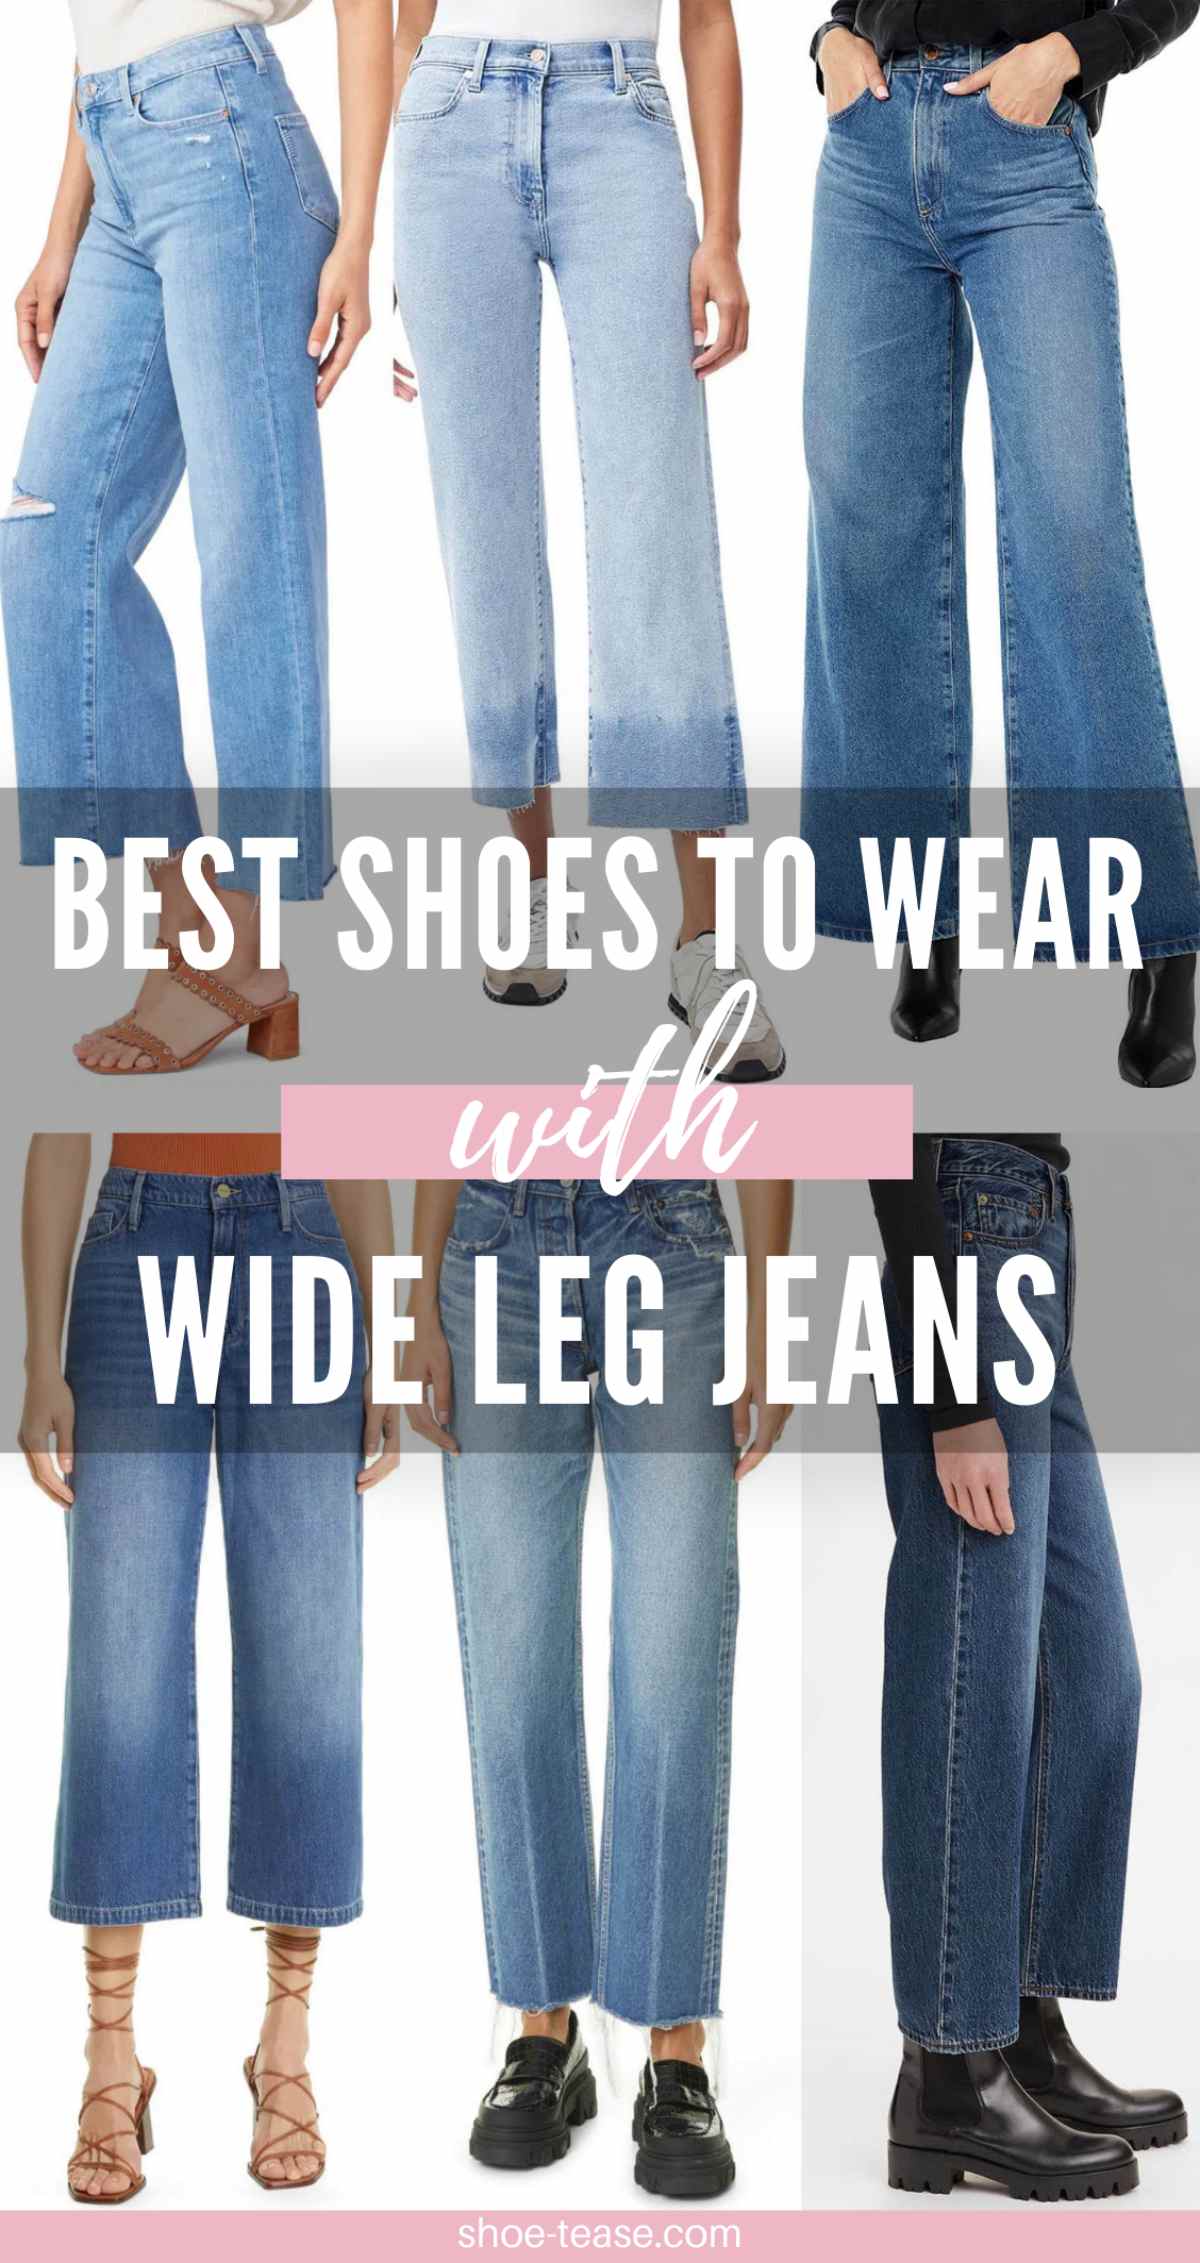 6 women wearing different shoes with wide leg jeans.